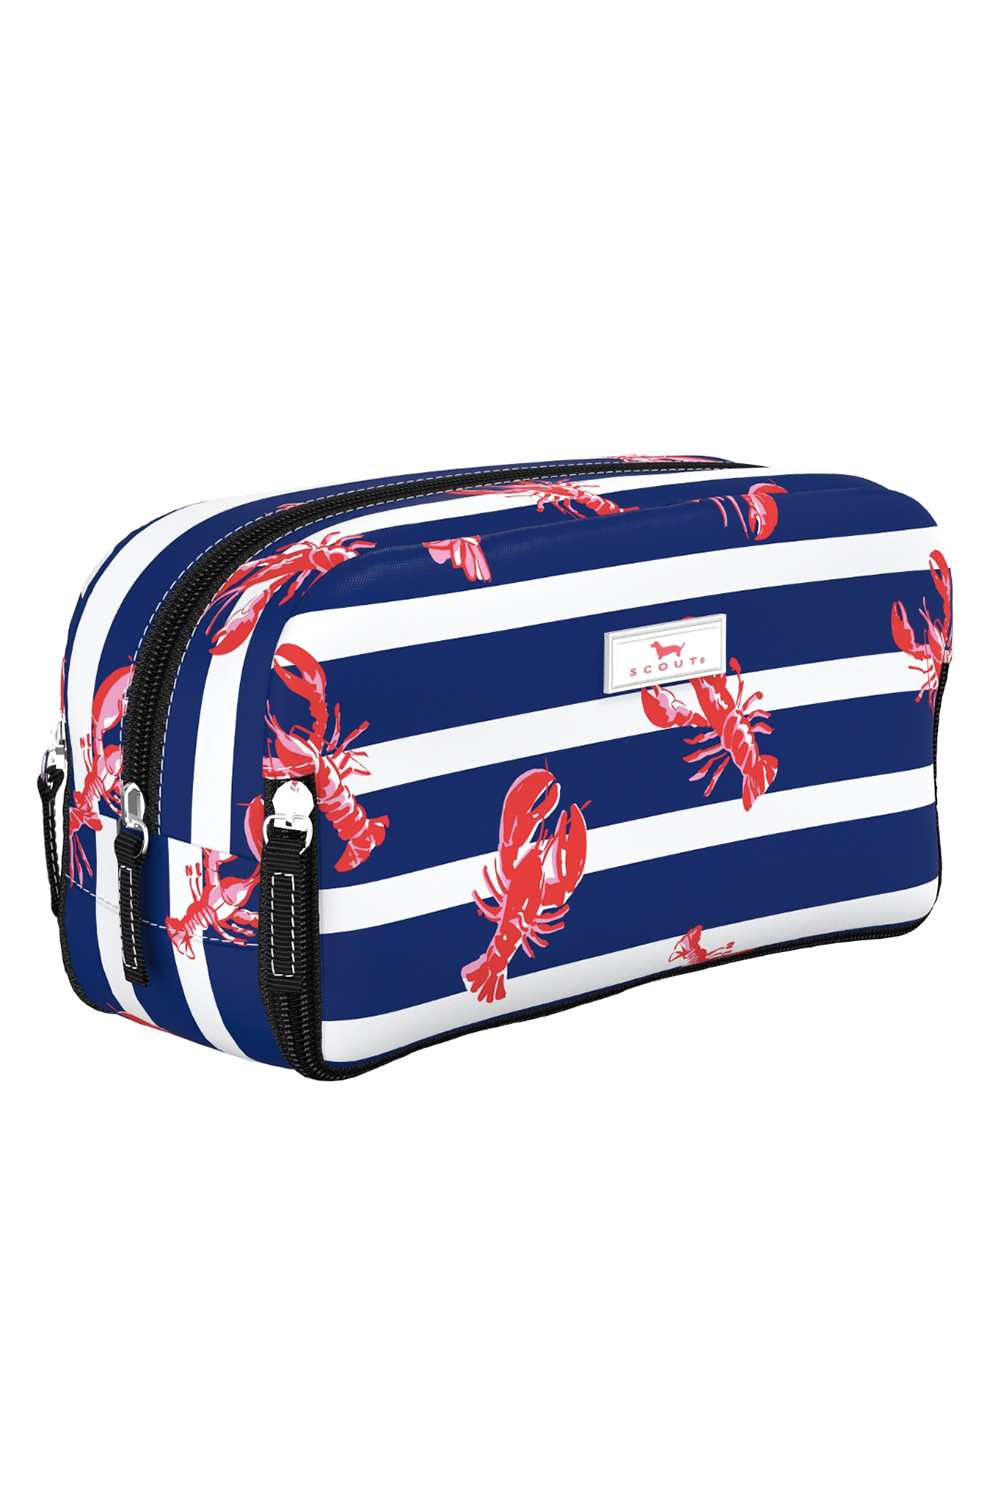 3 Way Cosmetic Bag - "Catch of the Day" SUM24